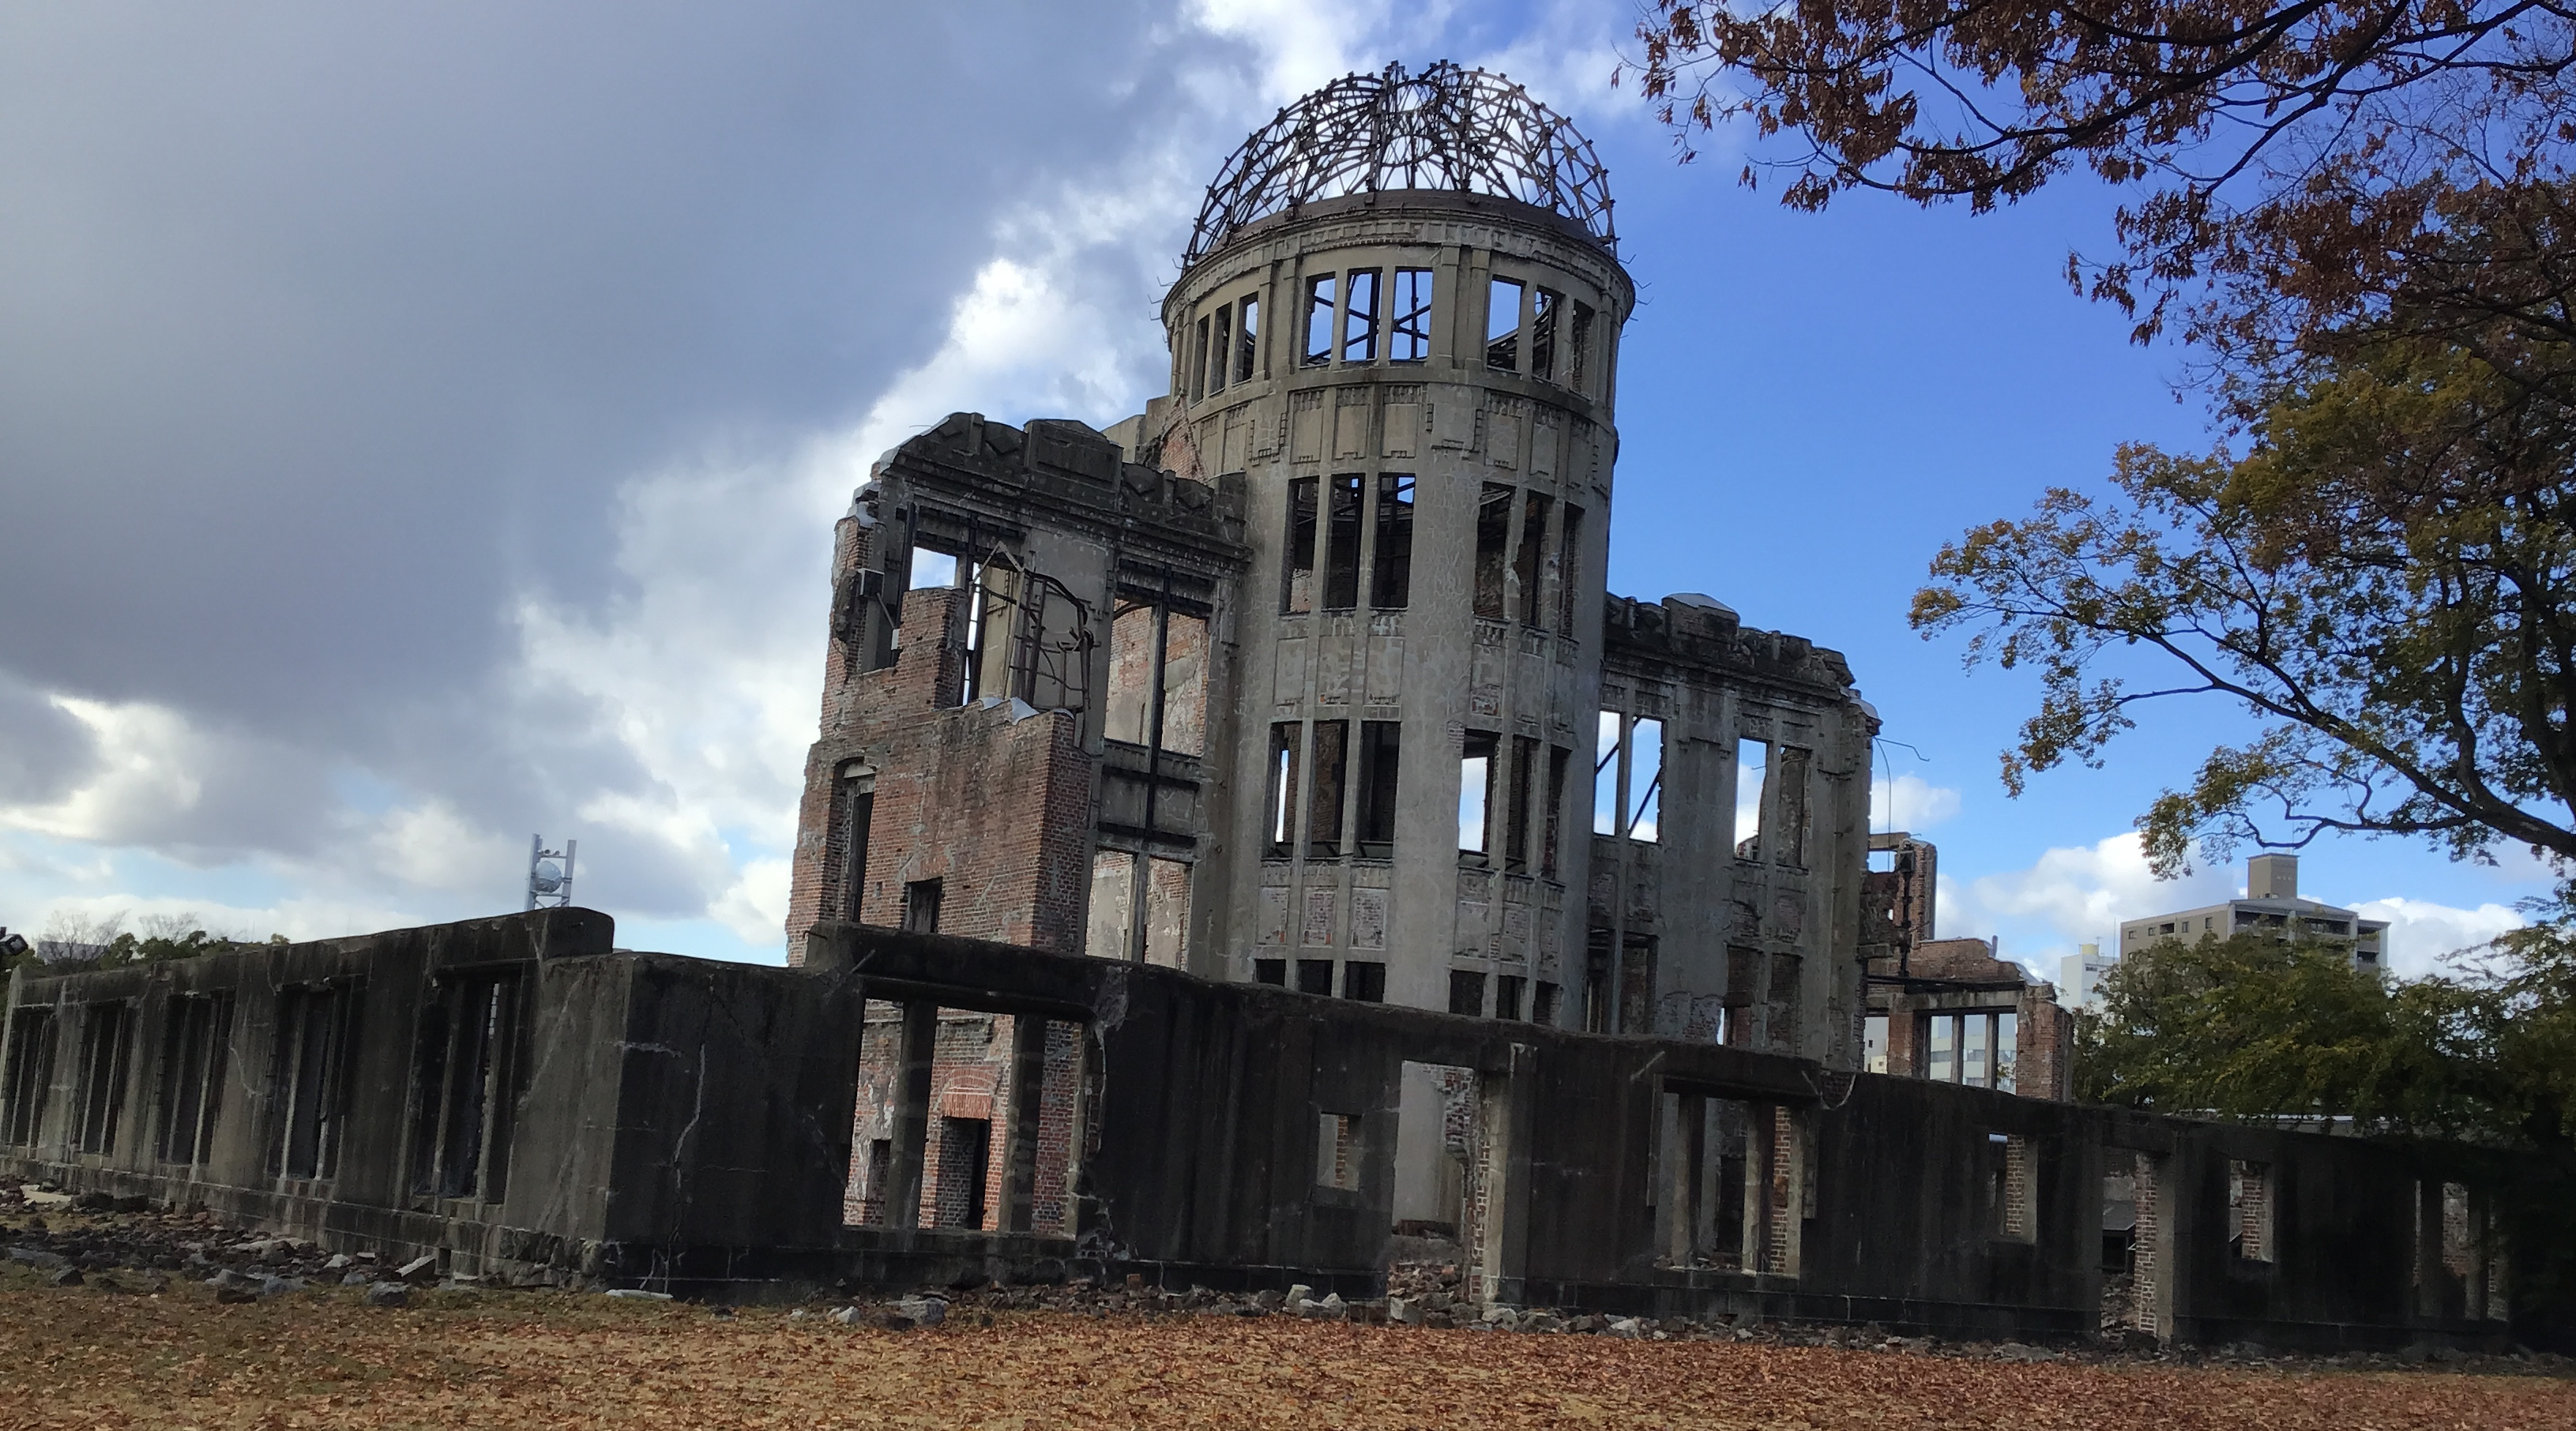 The surviving dome in Hiroshima